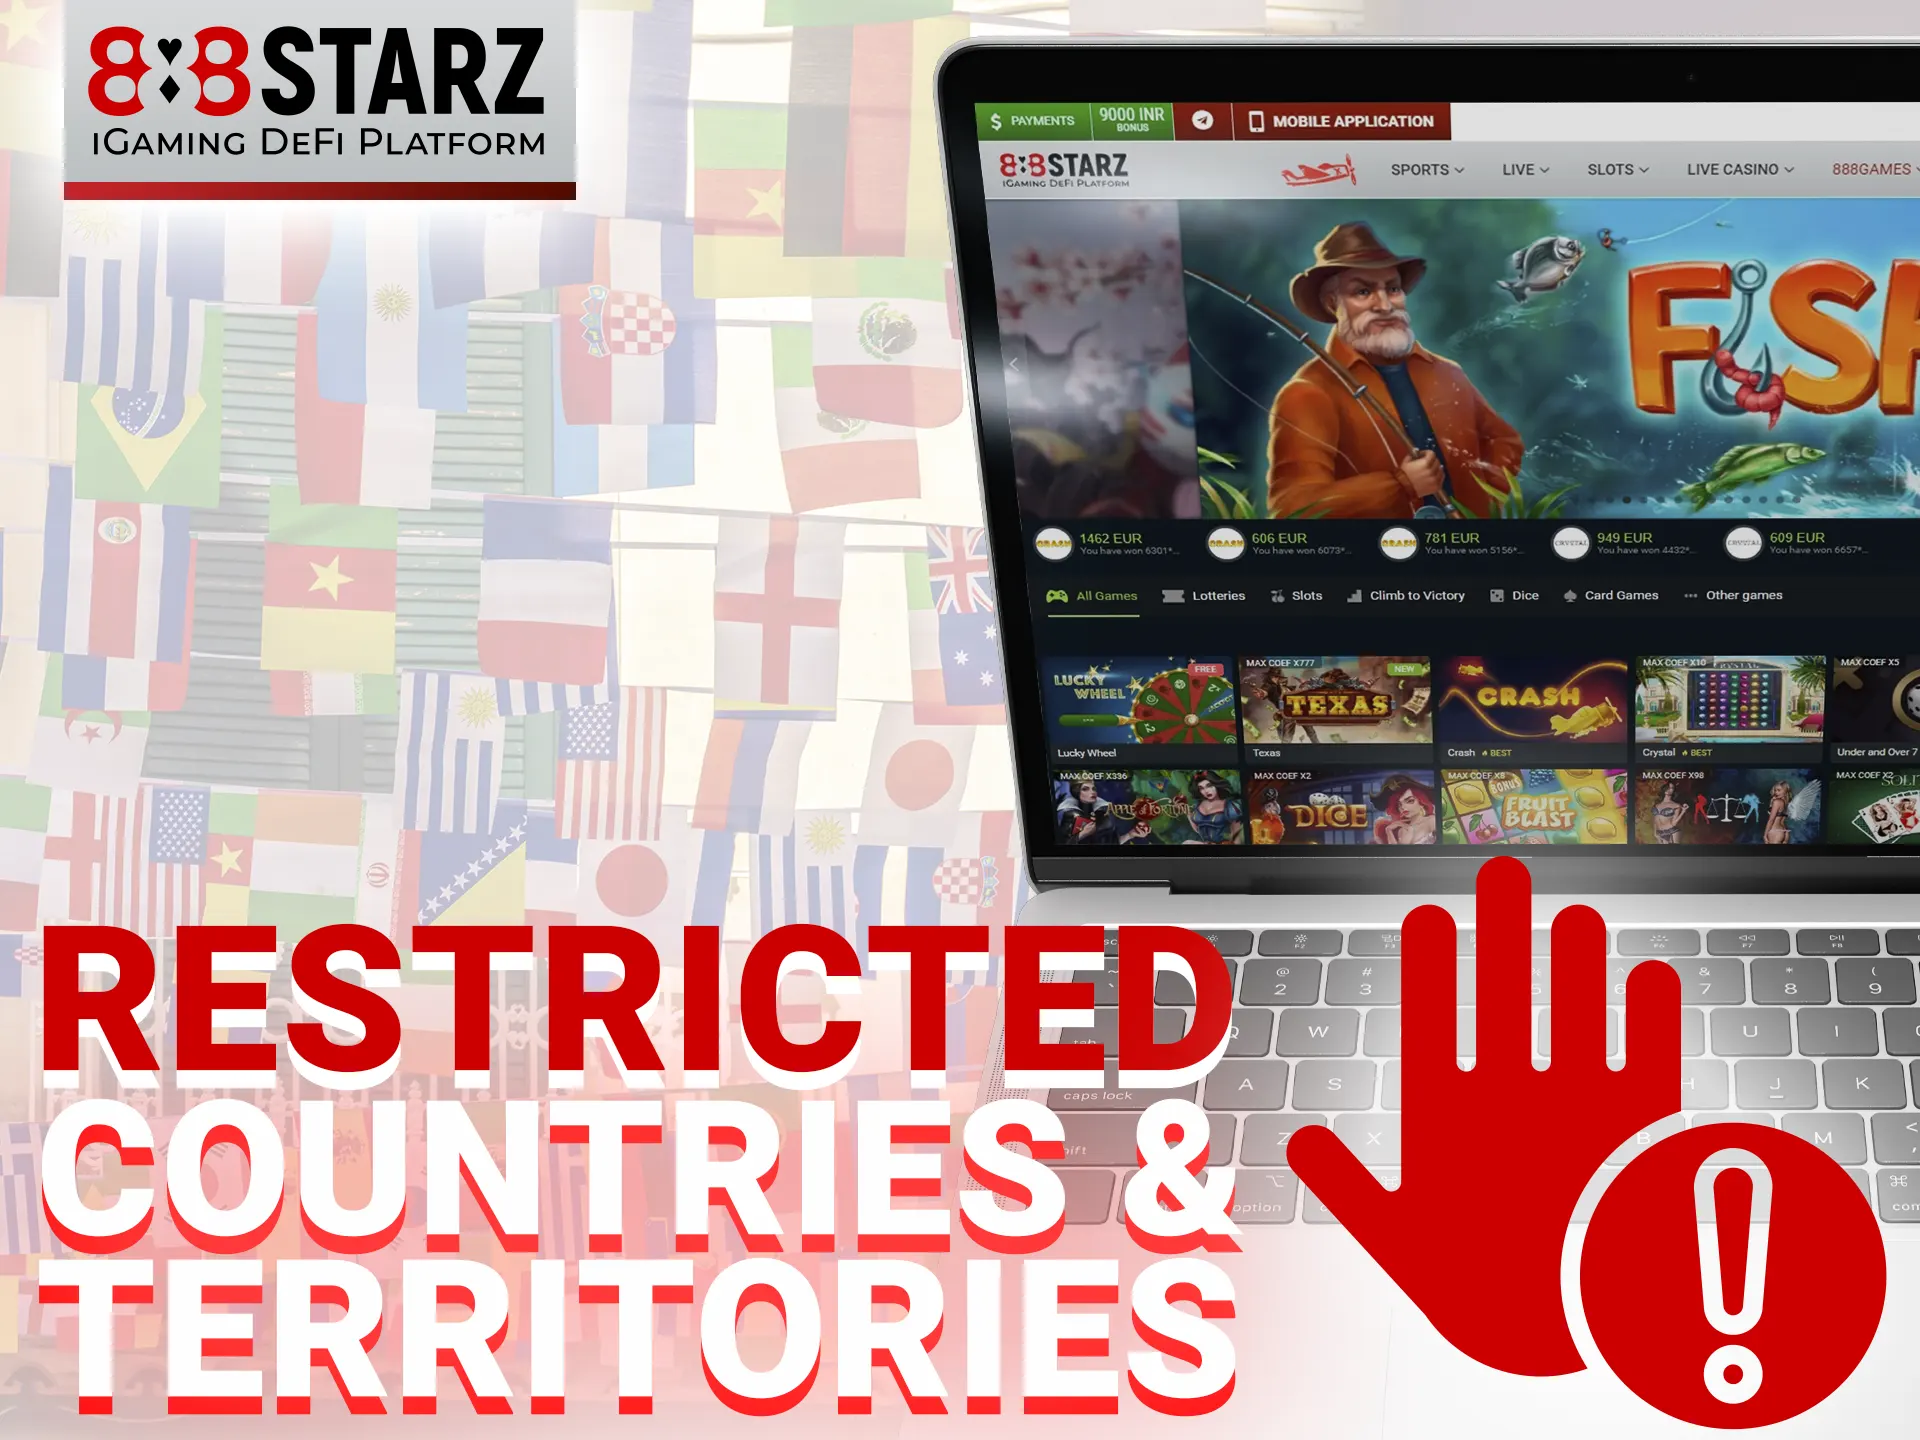 There are several countries where online gambling is banned, so players from these countries cannot access 888starz online casino.